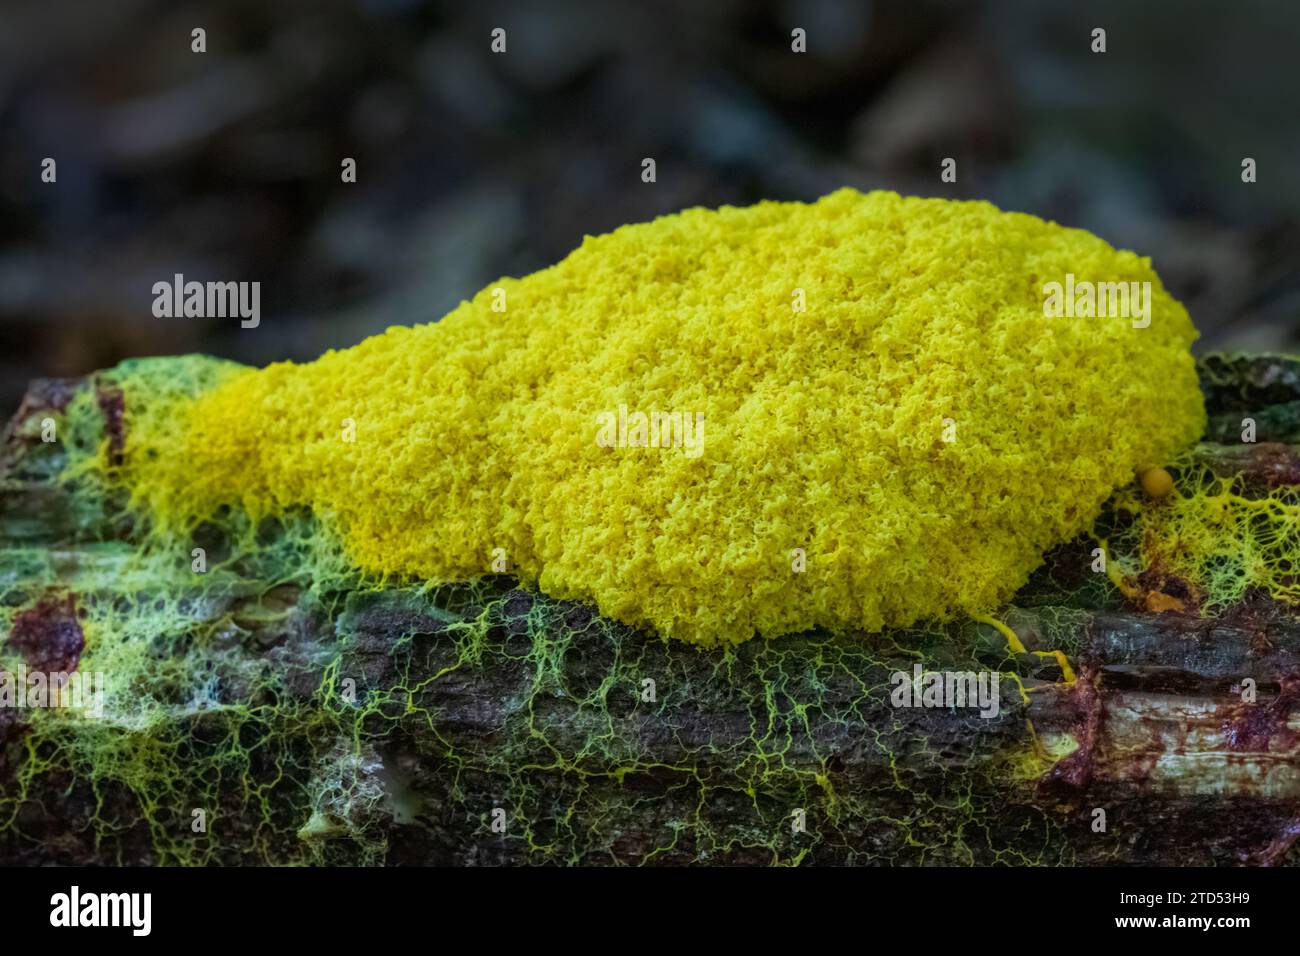 Closeup of yellow slime mold with veins network on dead tree log Stock Photo